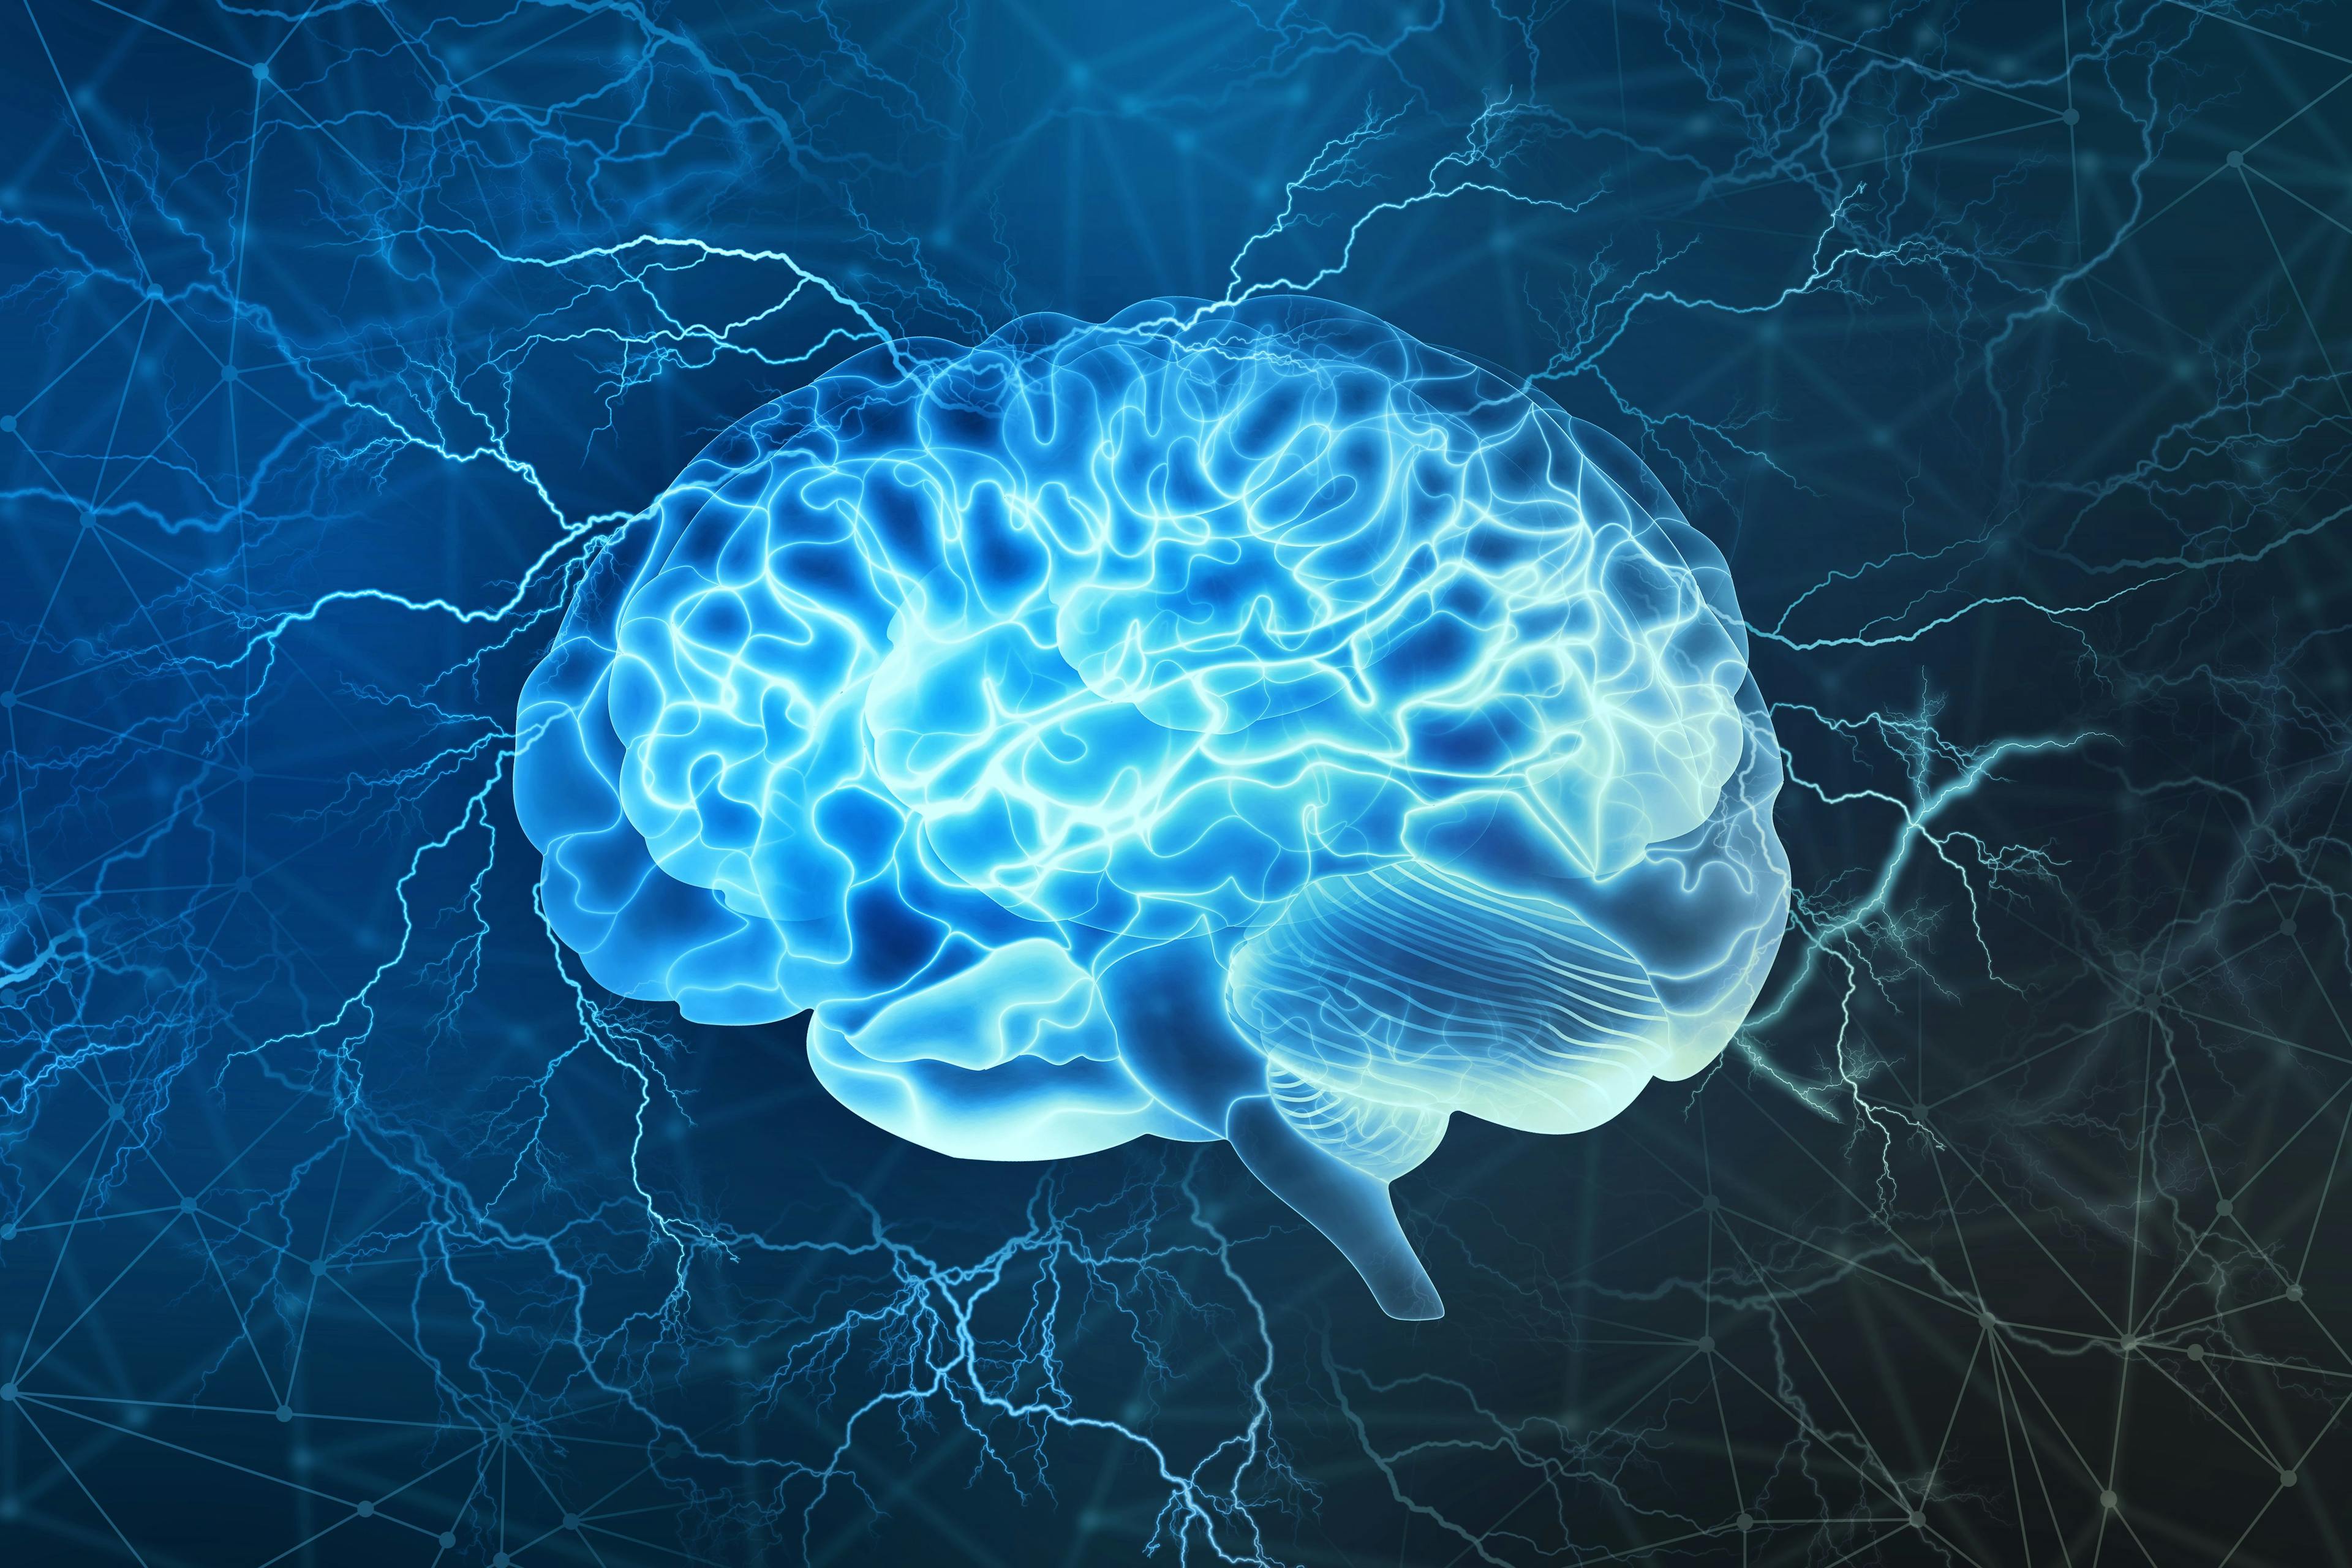 Human brain digital illustration. Electrical activity, flashes and lightning on a blue background. | Image Credit: Siarheialth - stock.adobe.com